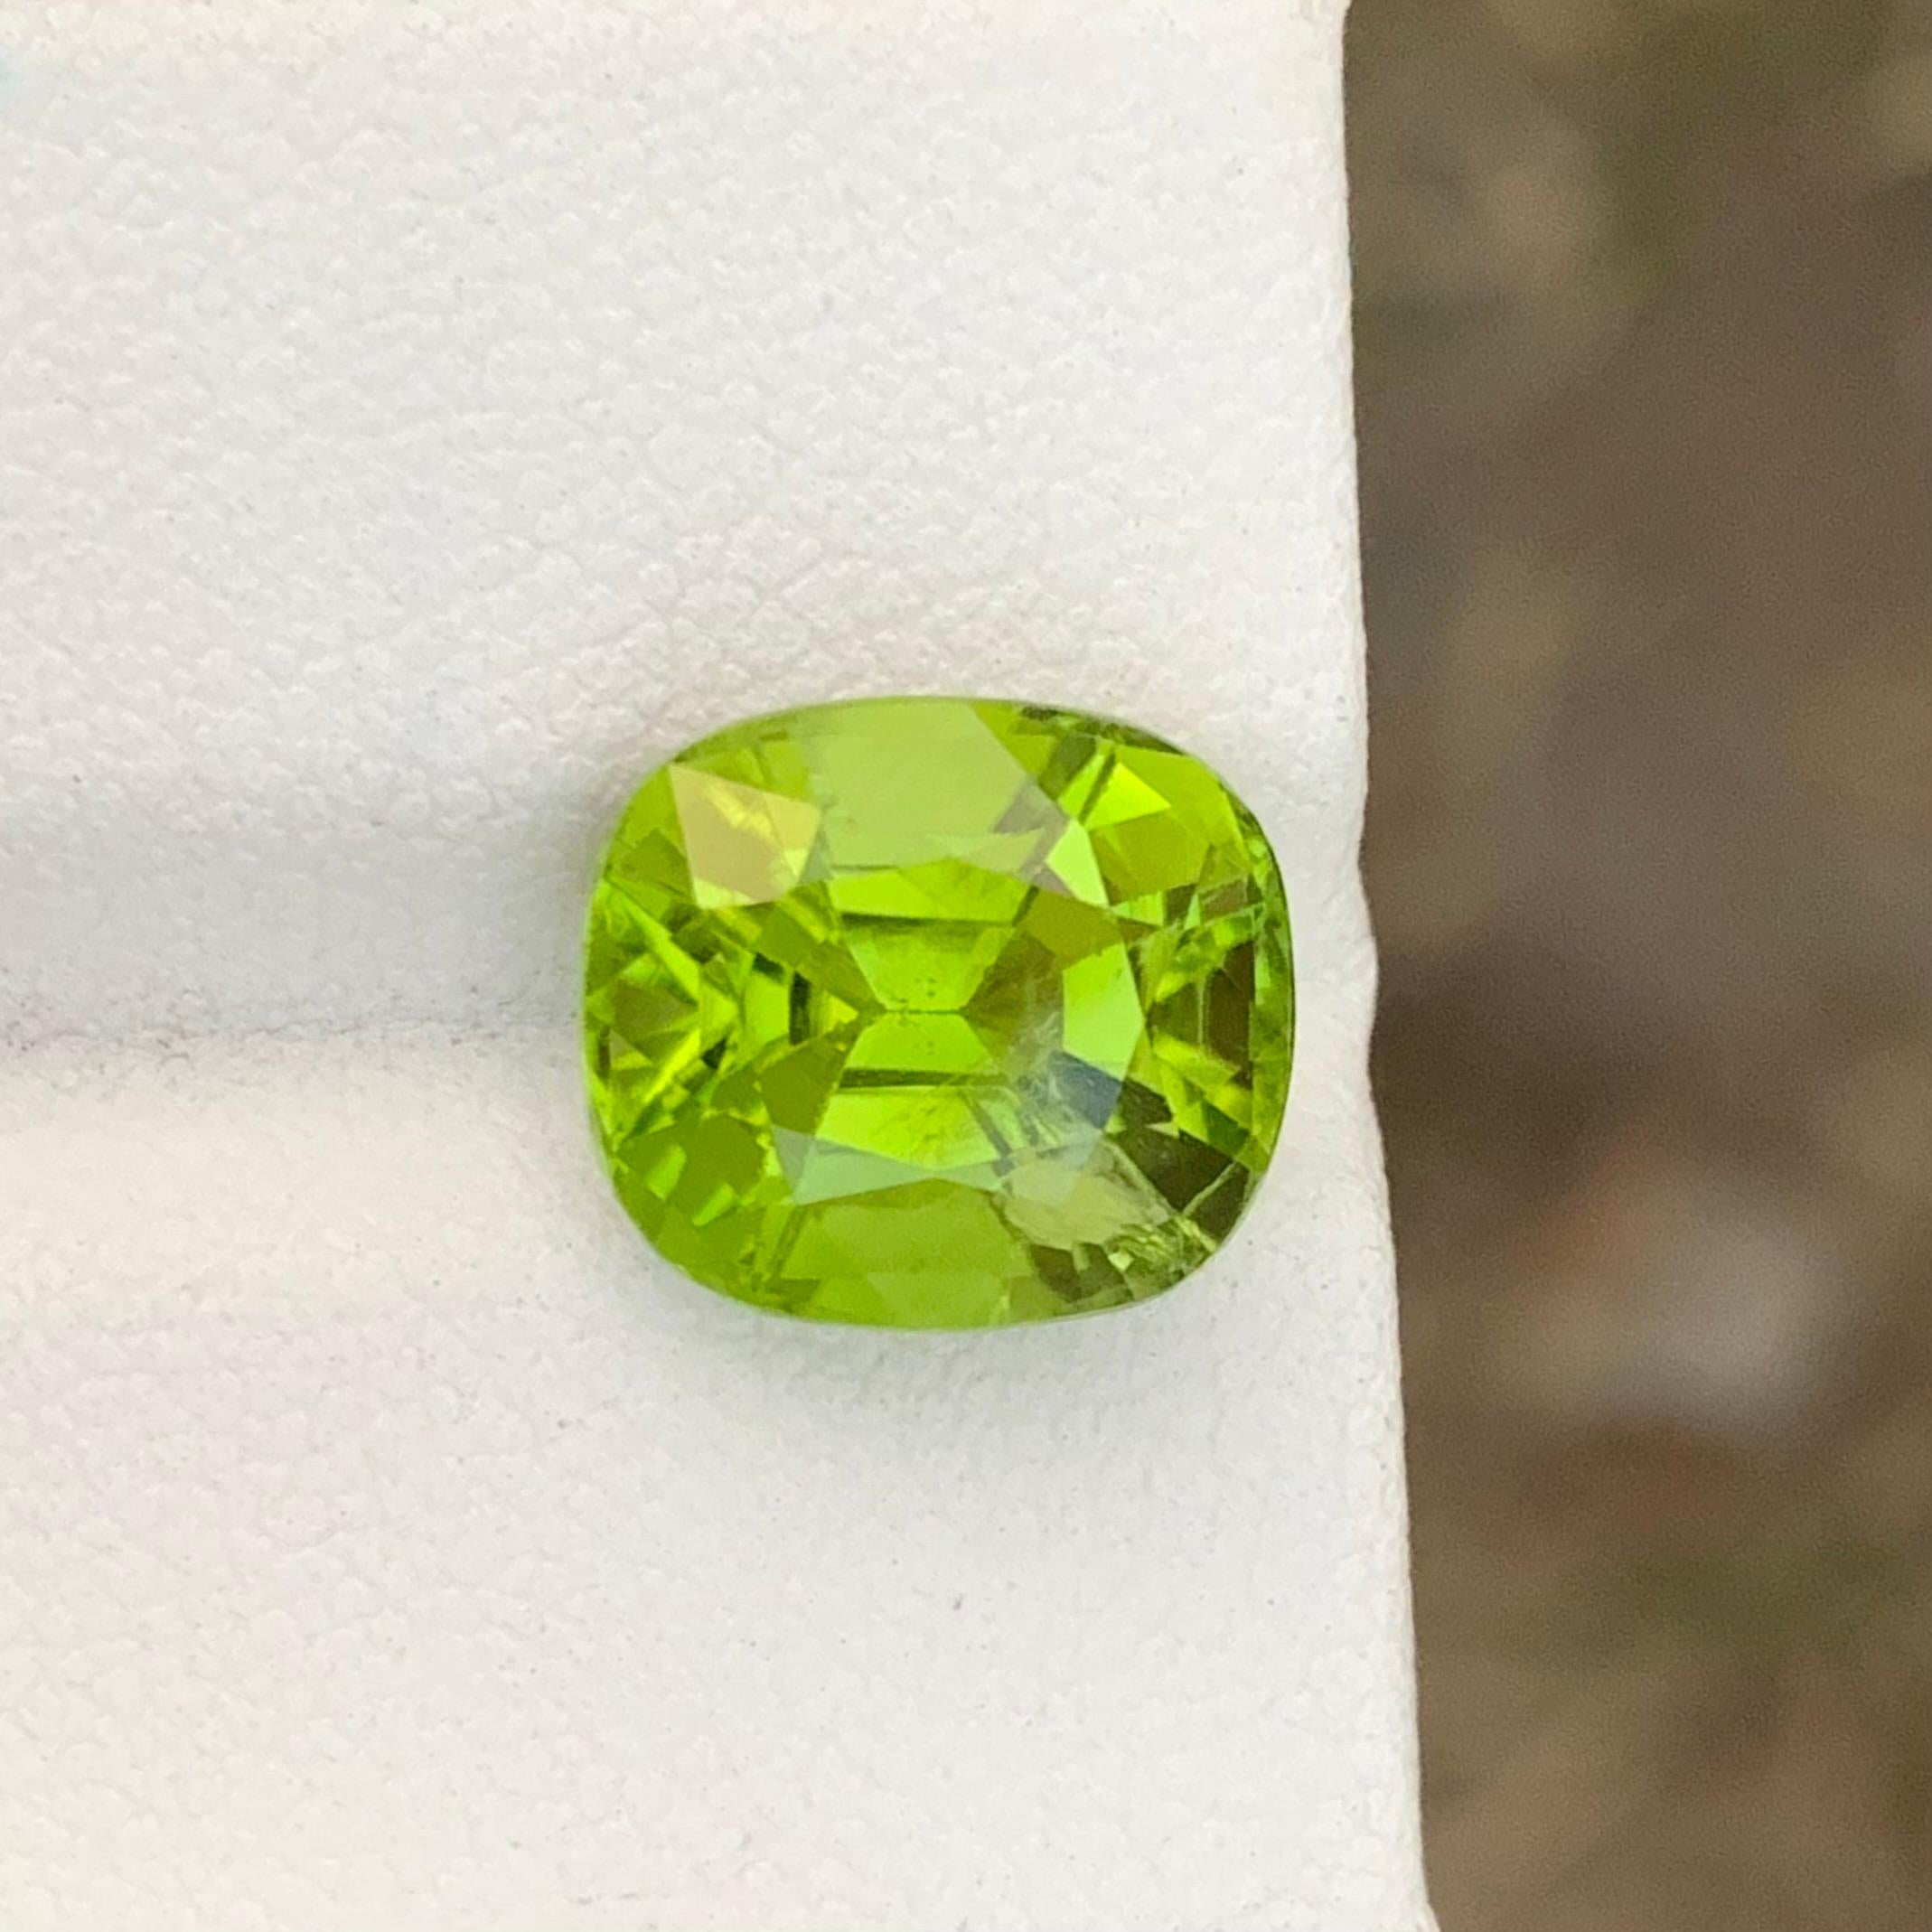 Stunning Natural Faceted Green Peridot Ring Gemstone 6.05 Carats  For Sale 3